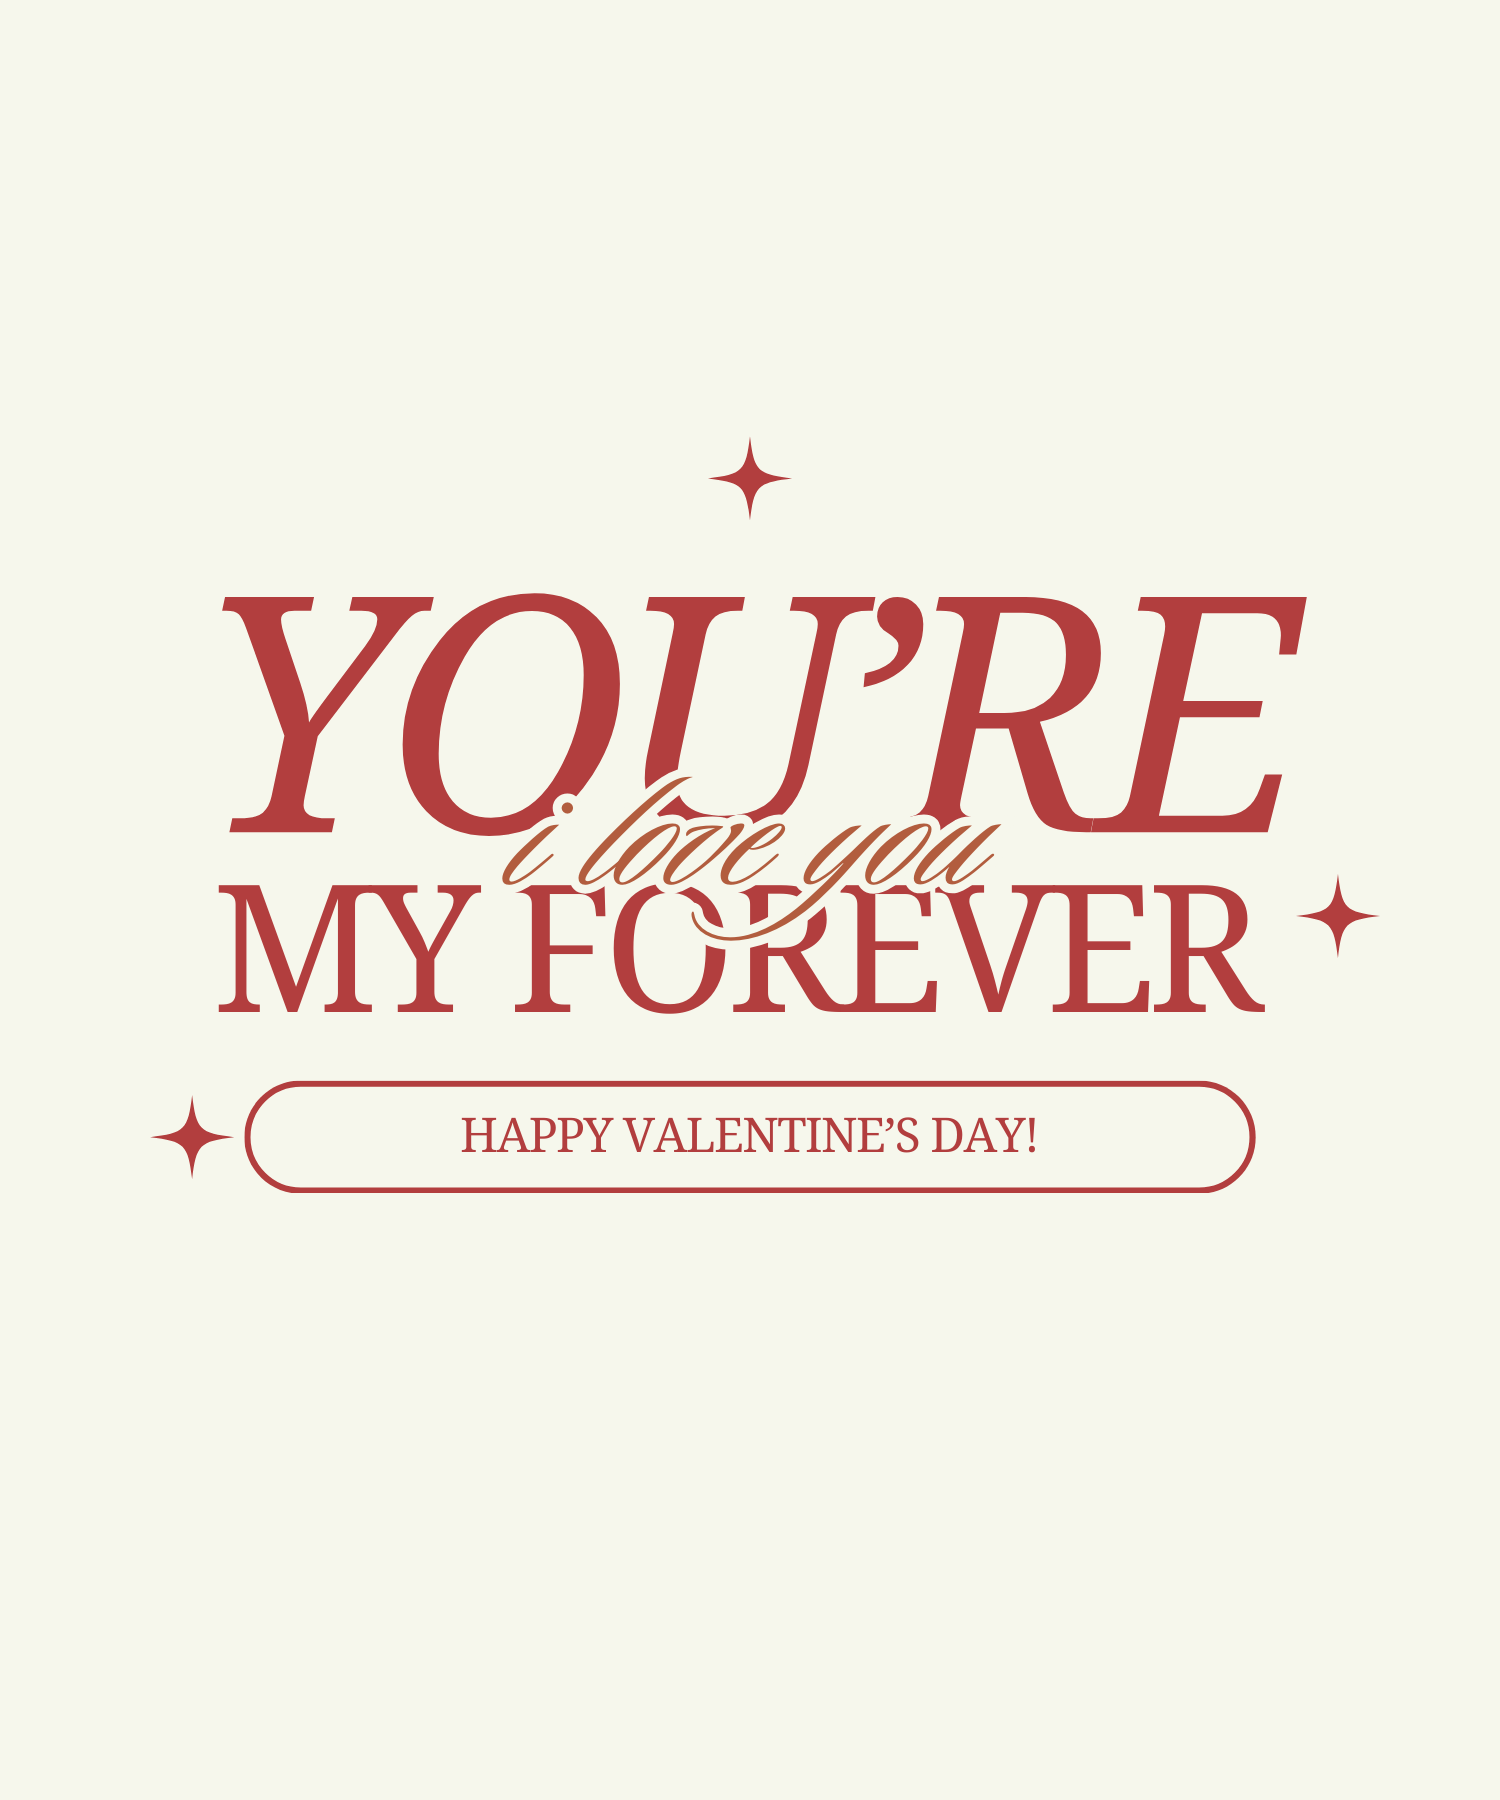 You're My Forever Greeting Card